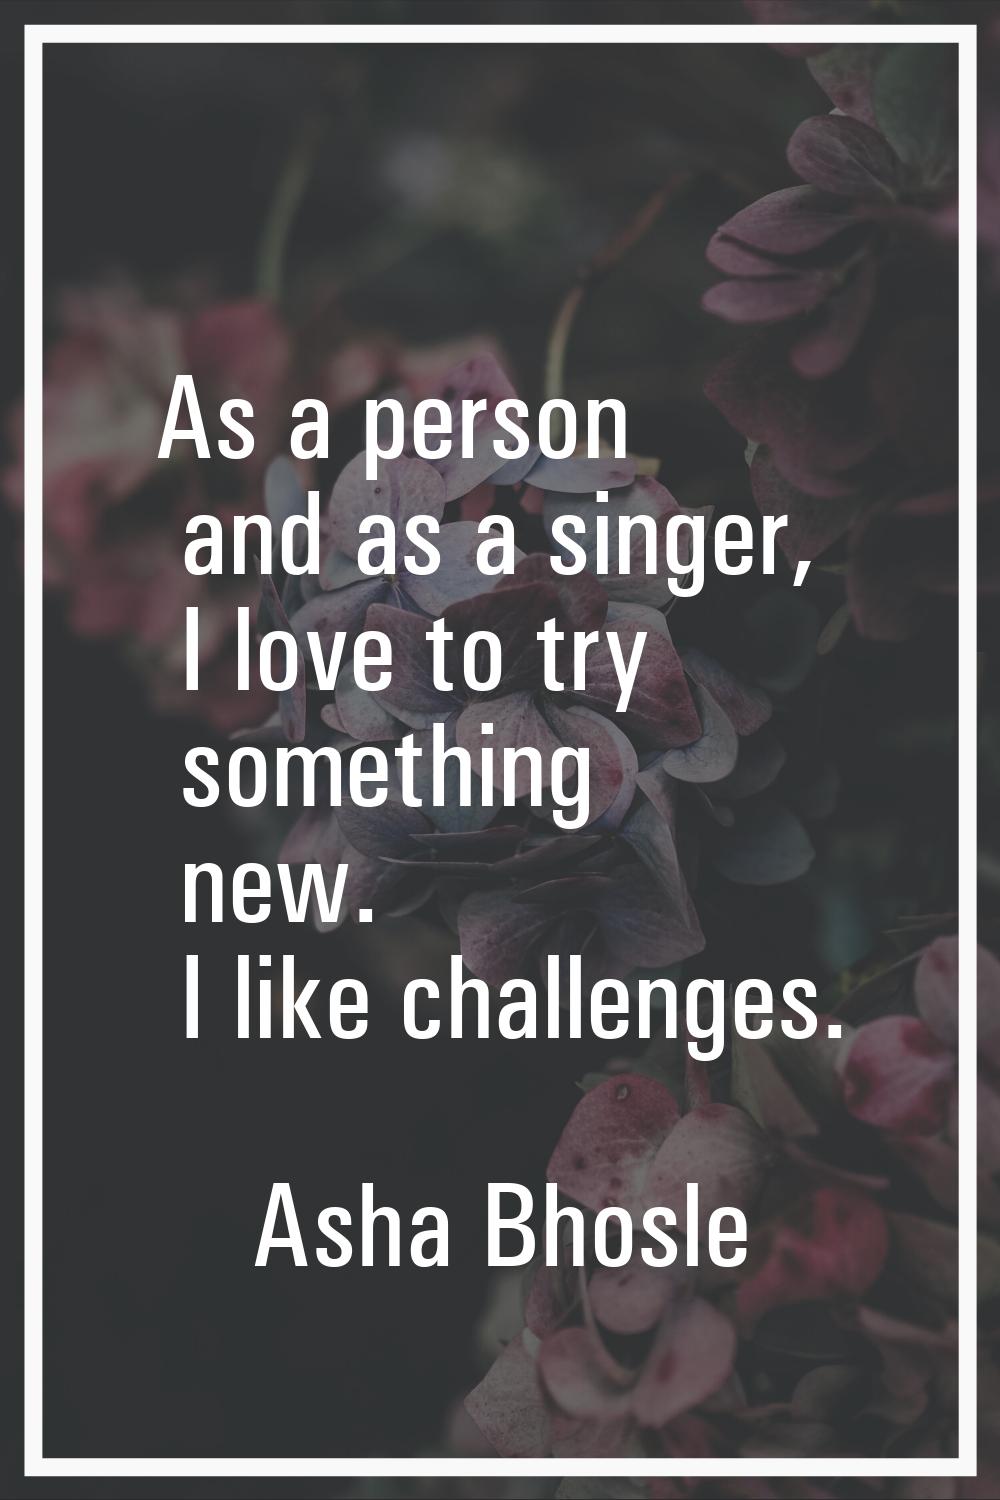 As a person and as a singer, I love to try something new. I like challenges.